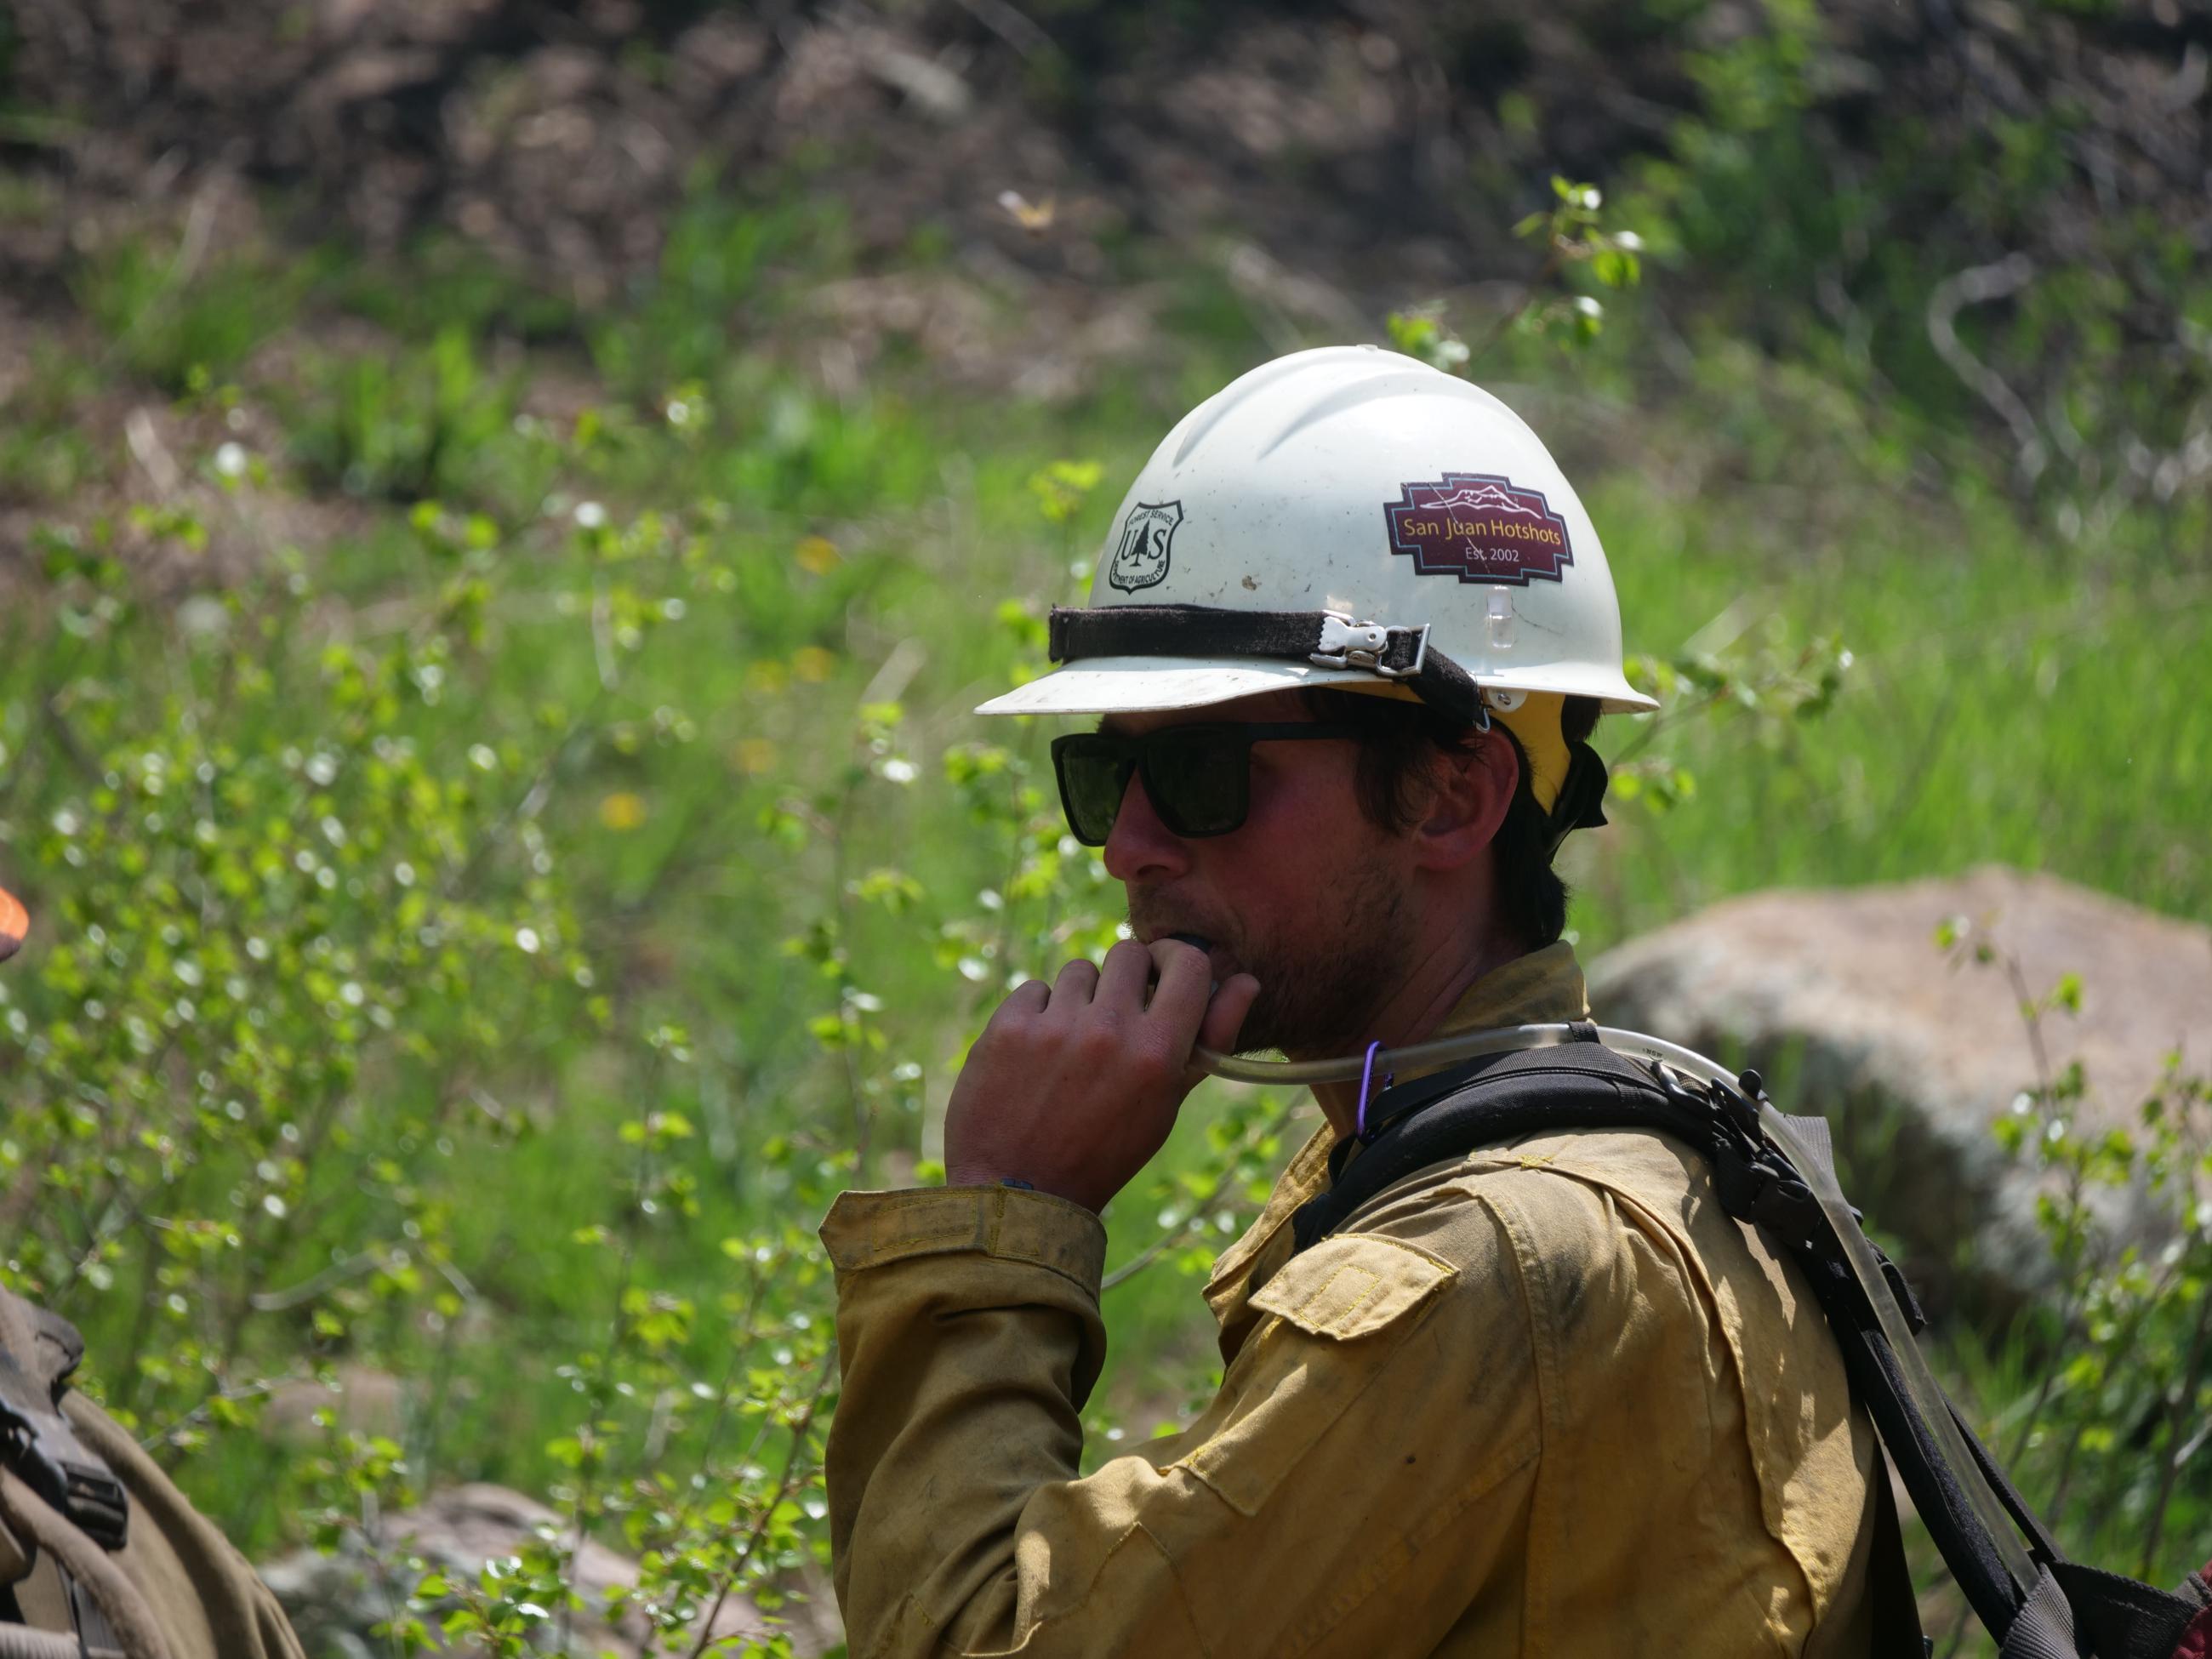 A firefighter in a white helmet with the words "San Juan Hot Shots" is seen taking a drink from his hydration pack.